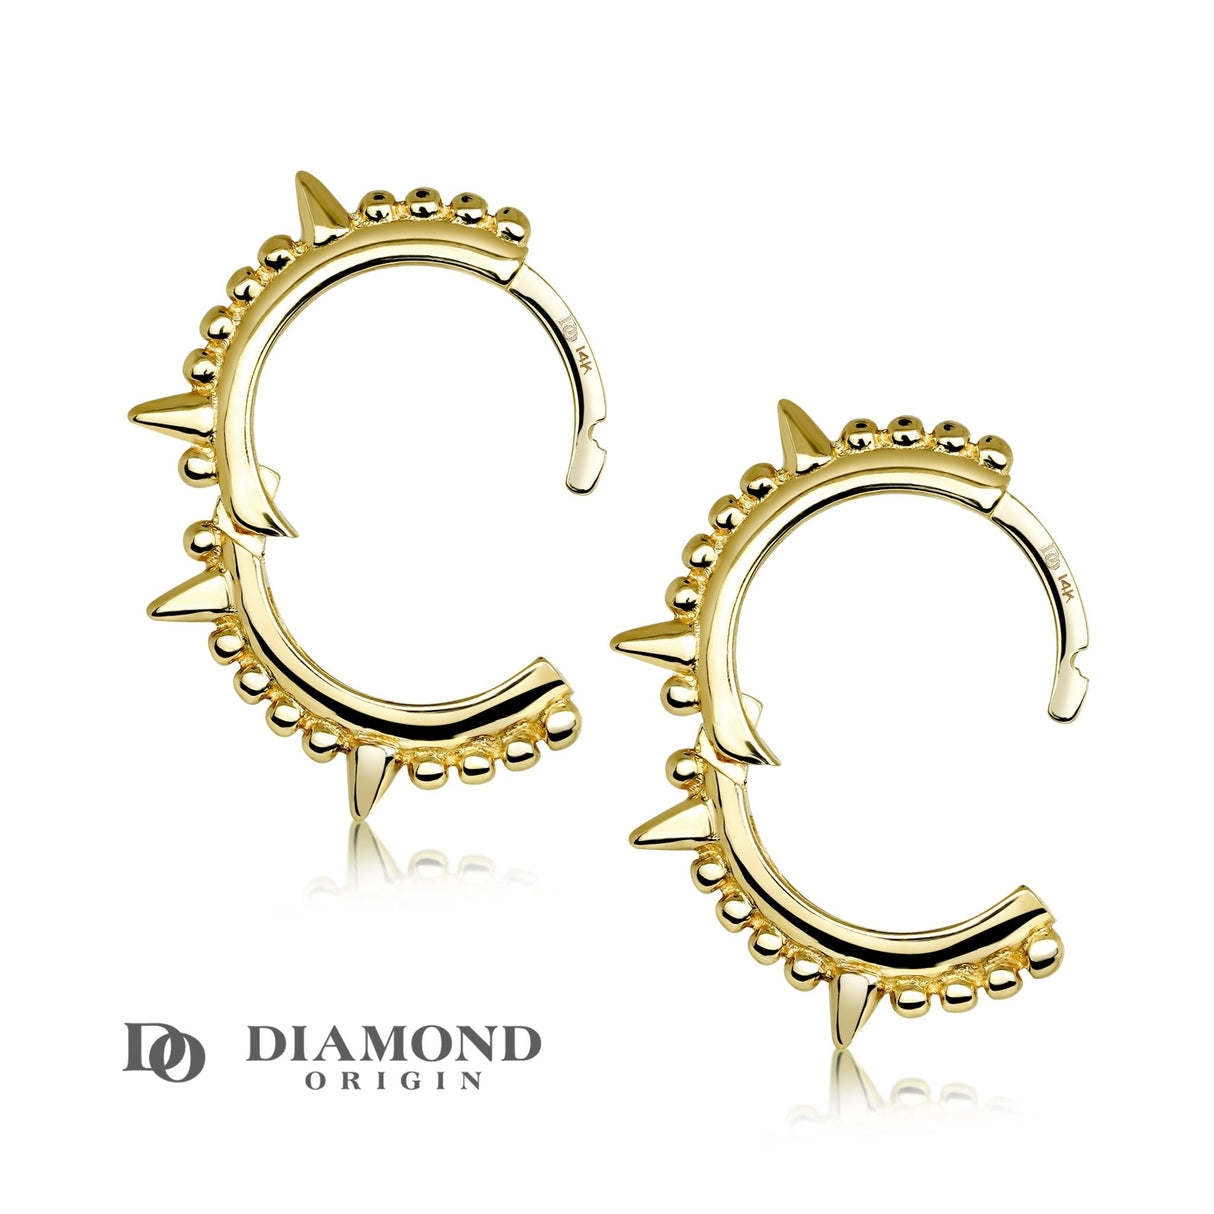 14K Gold Earrings 2023 Collection, 17mm Bead N Spike Hoop Earrings, Gold Hoop Earrings, - Diamond Origin